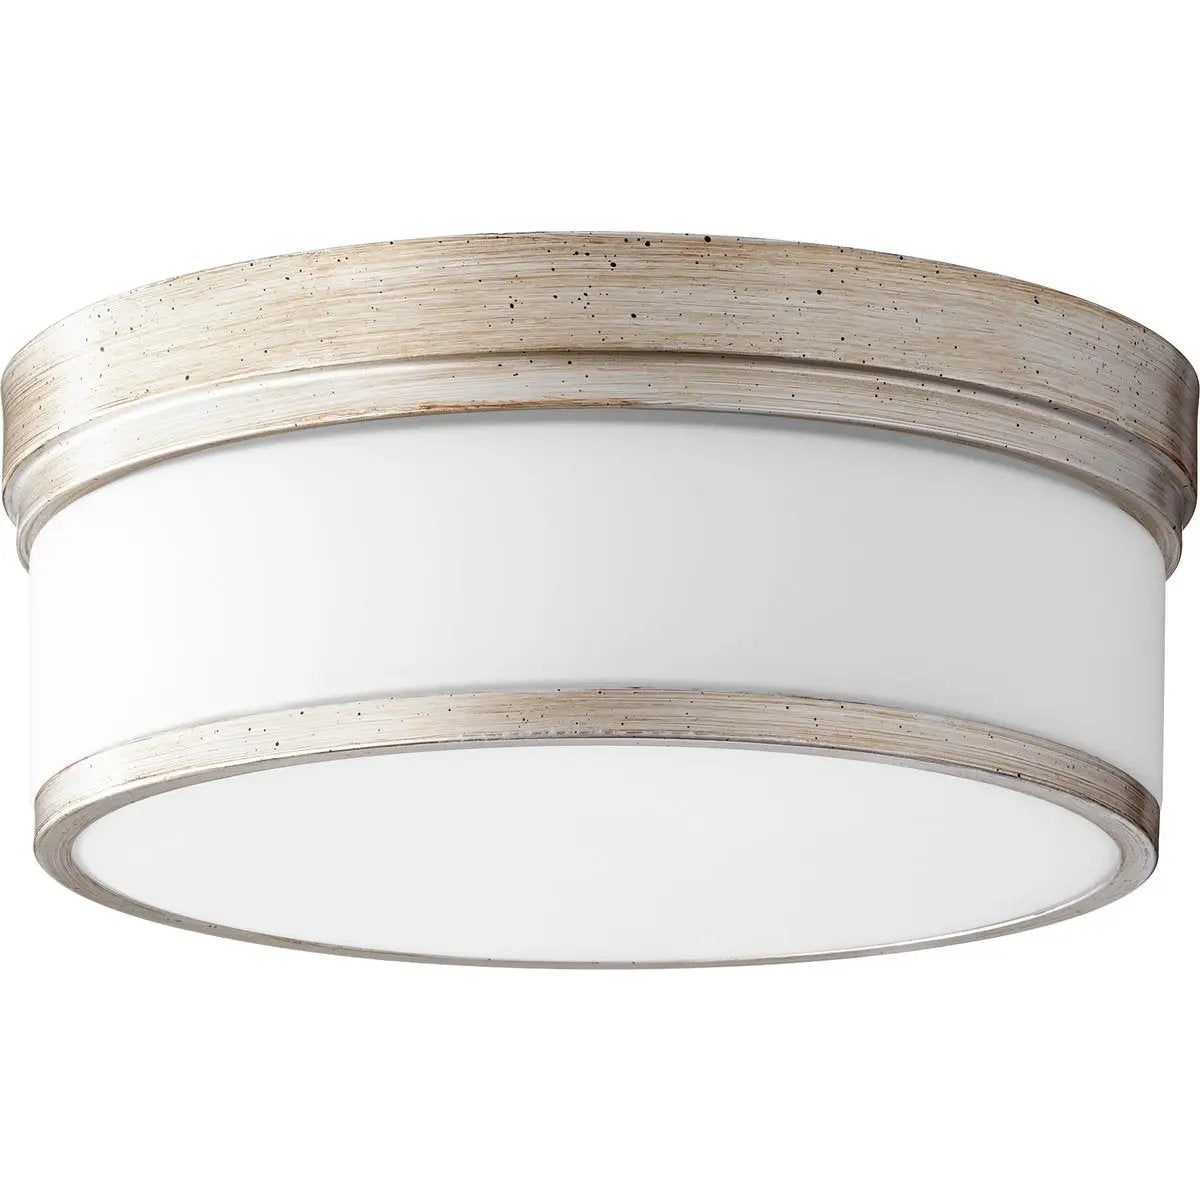 A modern flush mount light fixture with a white shade, adding futuristic luxury to any space. Brand: Quorum International. Wattage: 60W. Bulbs: 3 (not included). Dimensions: 14"W x 5.5"H. Warranty: 2 Years.